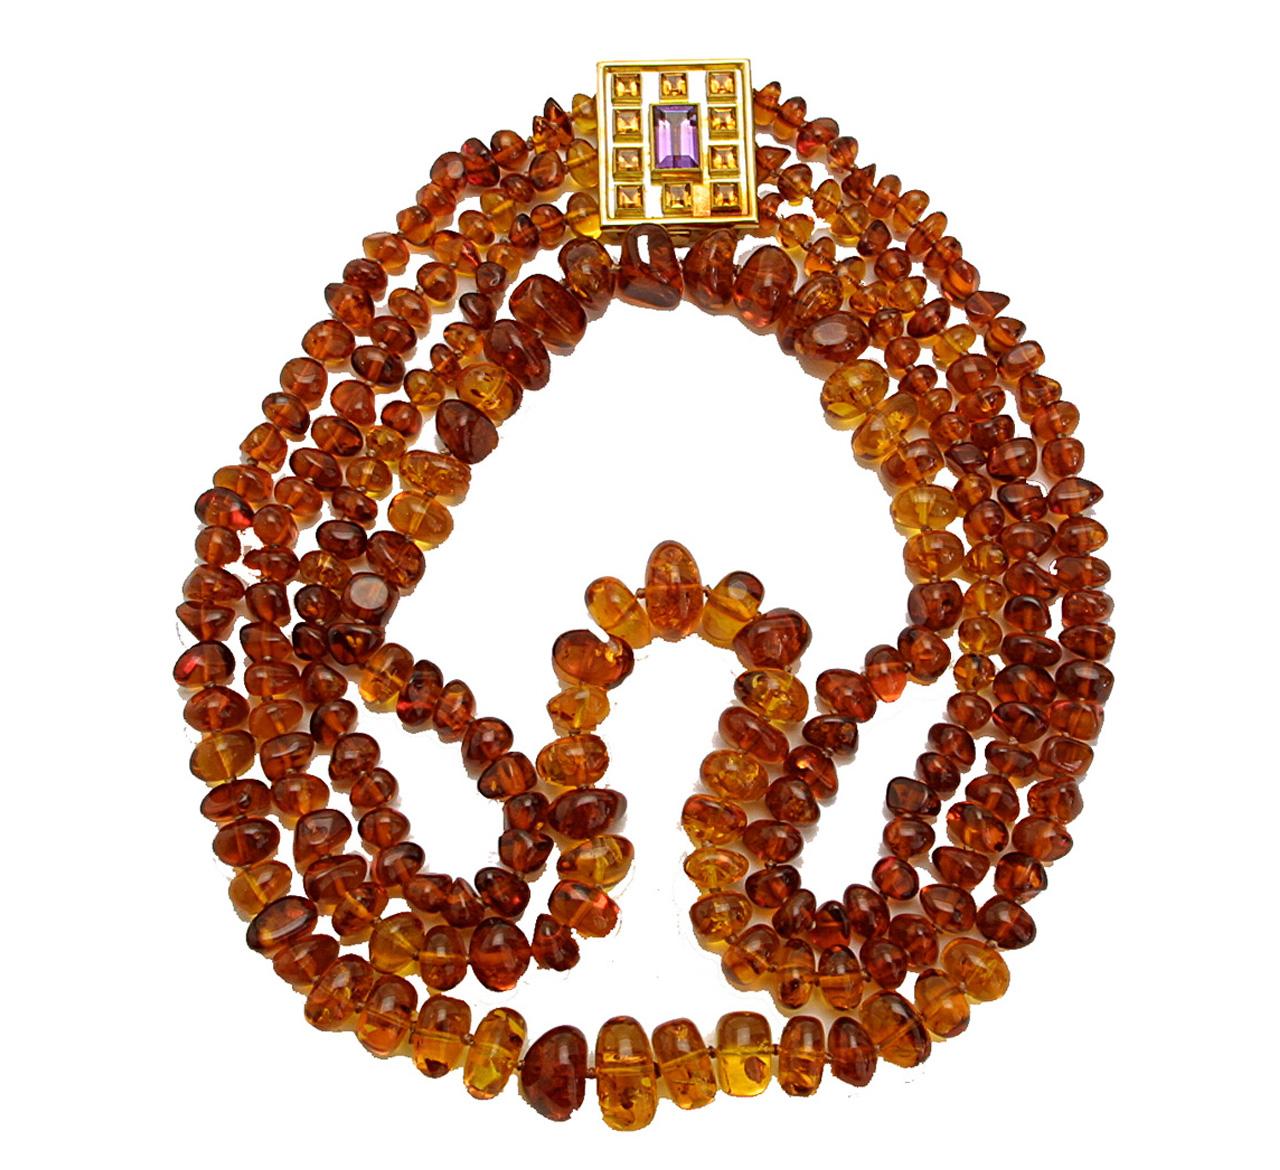 This amazing 3 row amber necklace with a 22 carat yellow gold close with amethyst and cirtine 7.2 ct
This nacklace is hand made by Colleen B. Rosenblat. 
Item Specifics
Length: inside 56 cm outside: 71 cm
Width: 3-4 cm
Gold close: 3 cm x 3.5 cm